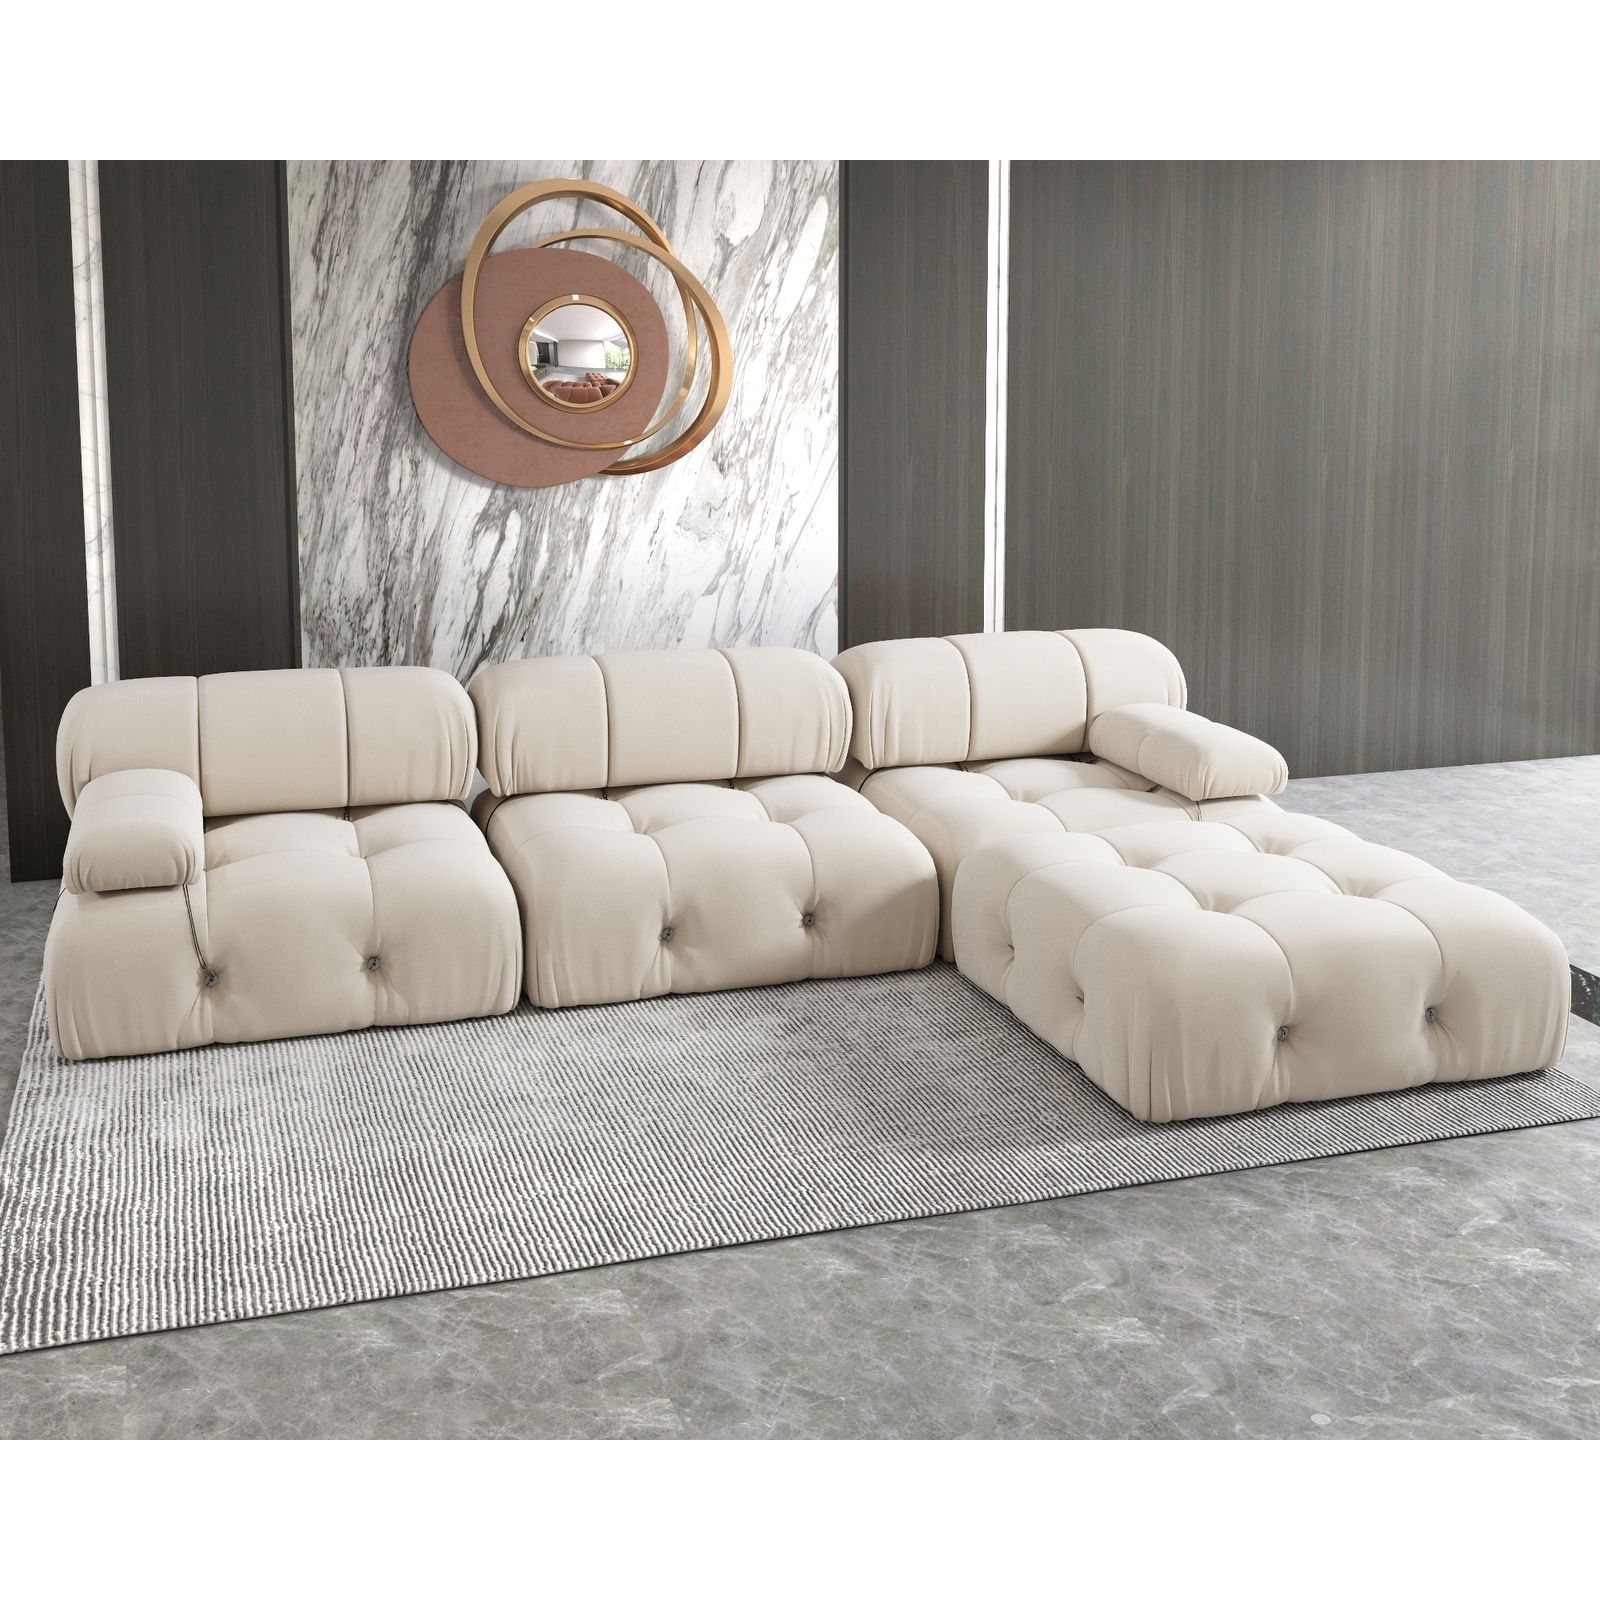 Modern Velvet Upholstered Large Modular Sectional Sofa – On Sale – –  35271394 With Regard To Upholstered Modular Couches With Storage (Gallery 6 of 20)